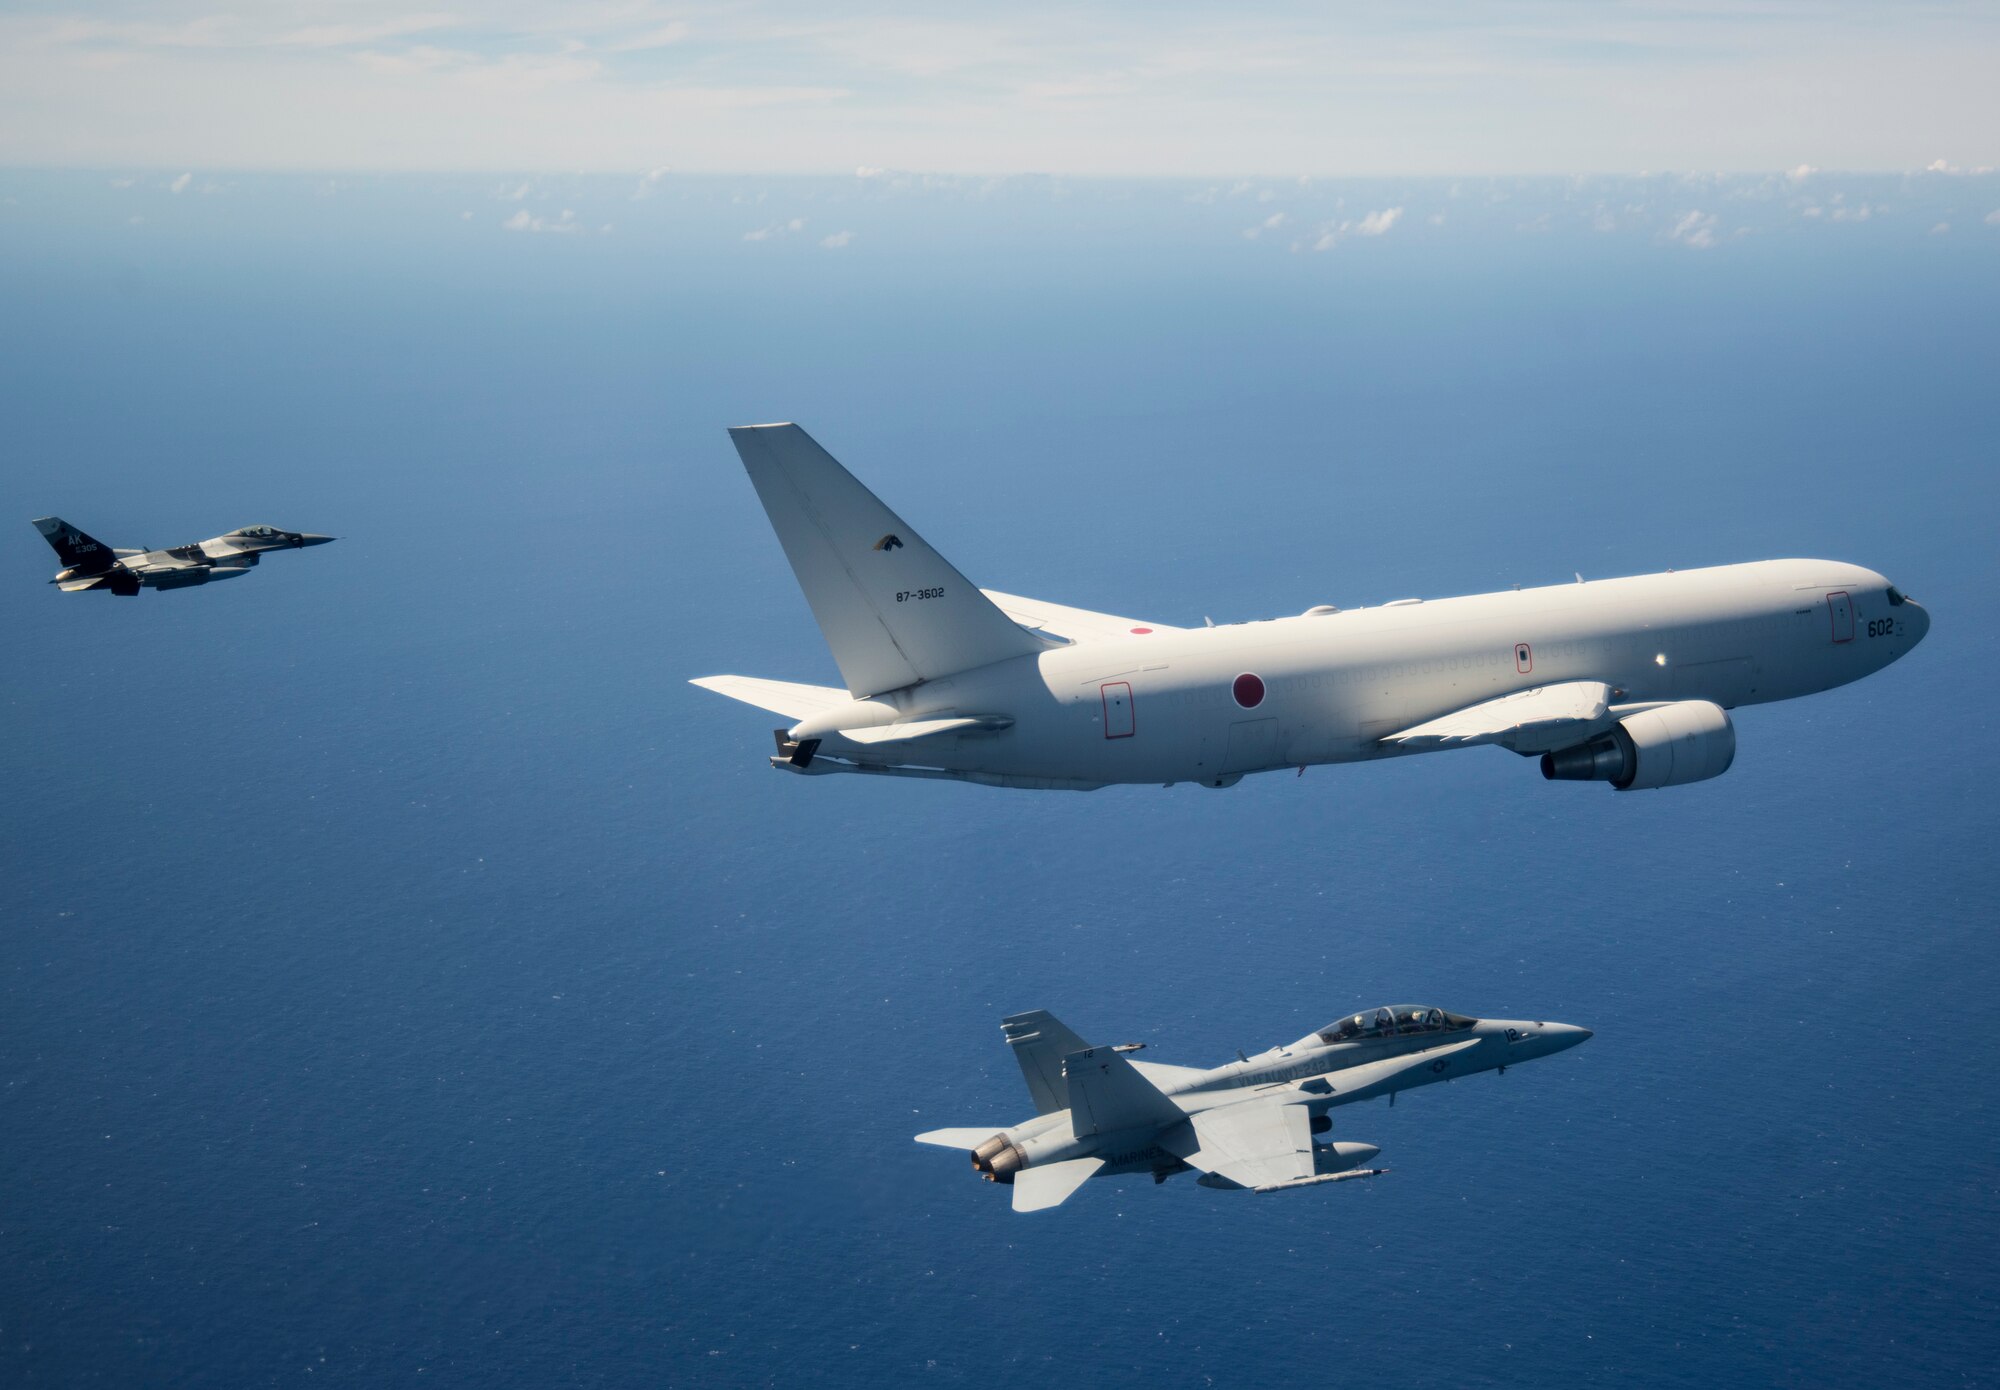 Aircraft from the United States and Japan participate in a COPE North 2019 airpower demonstration formation over the Pacific Ocean, March 6, 2019.